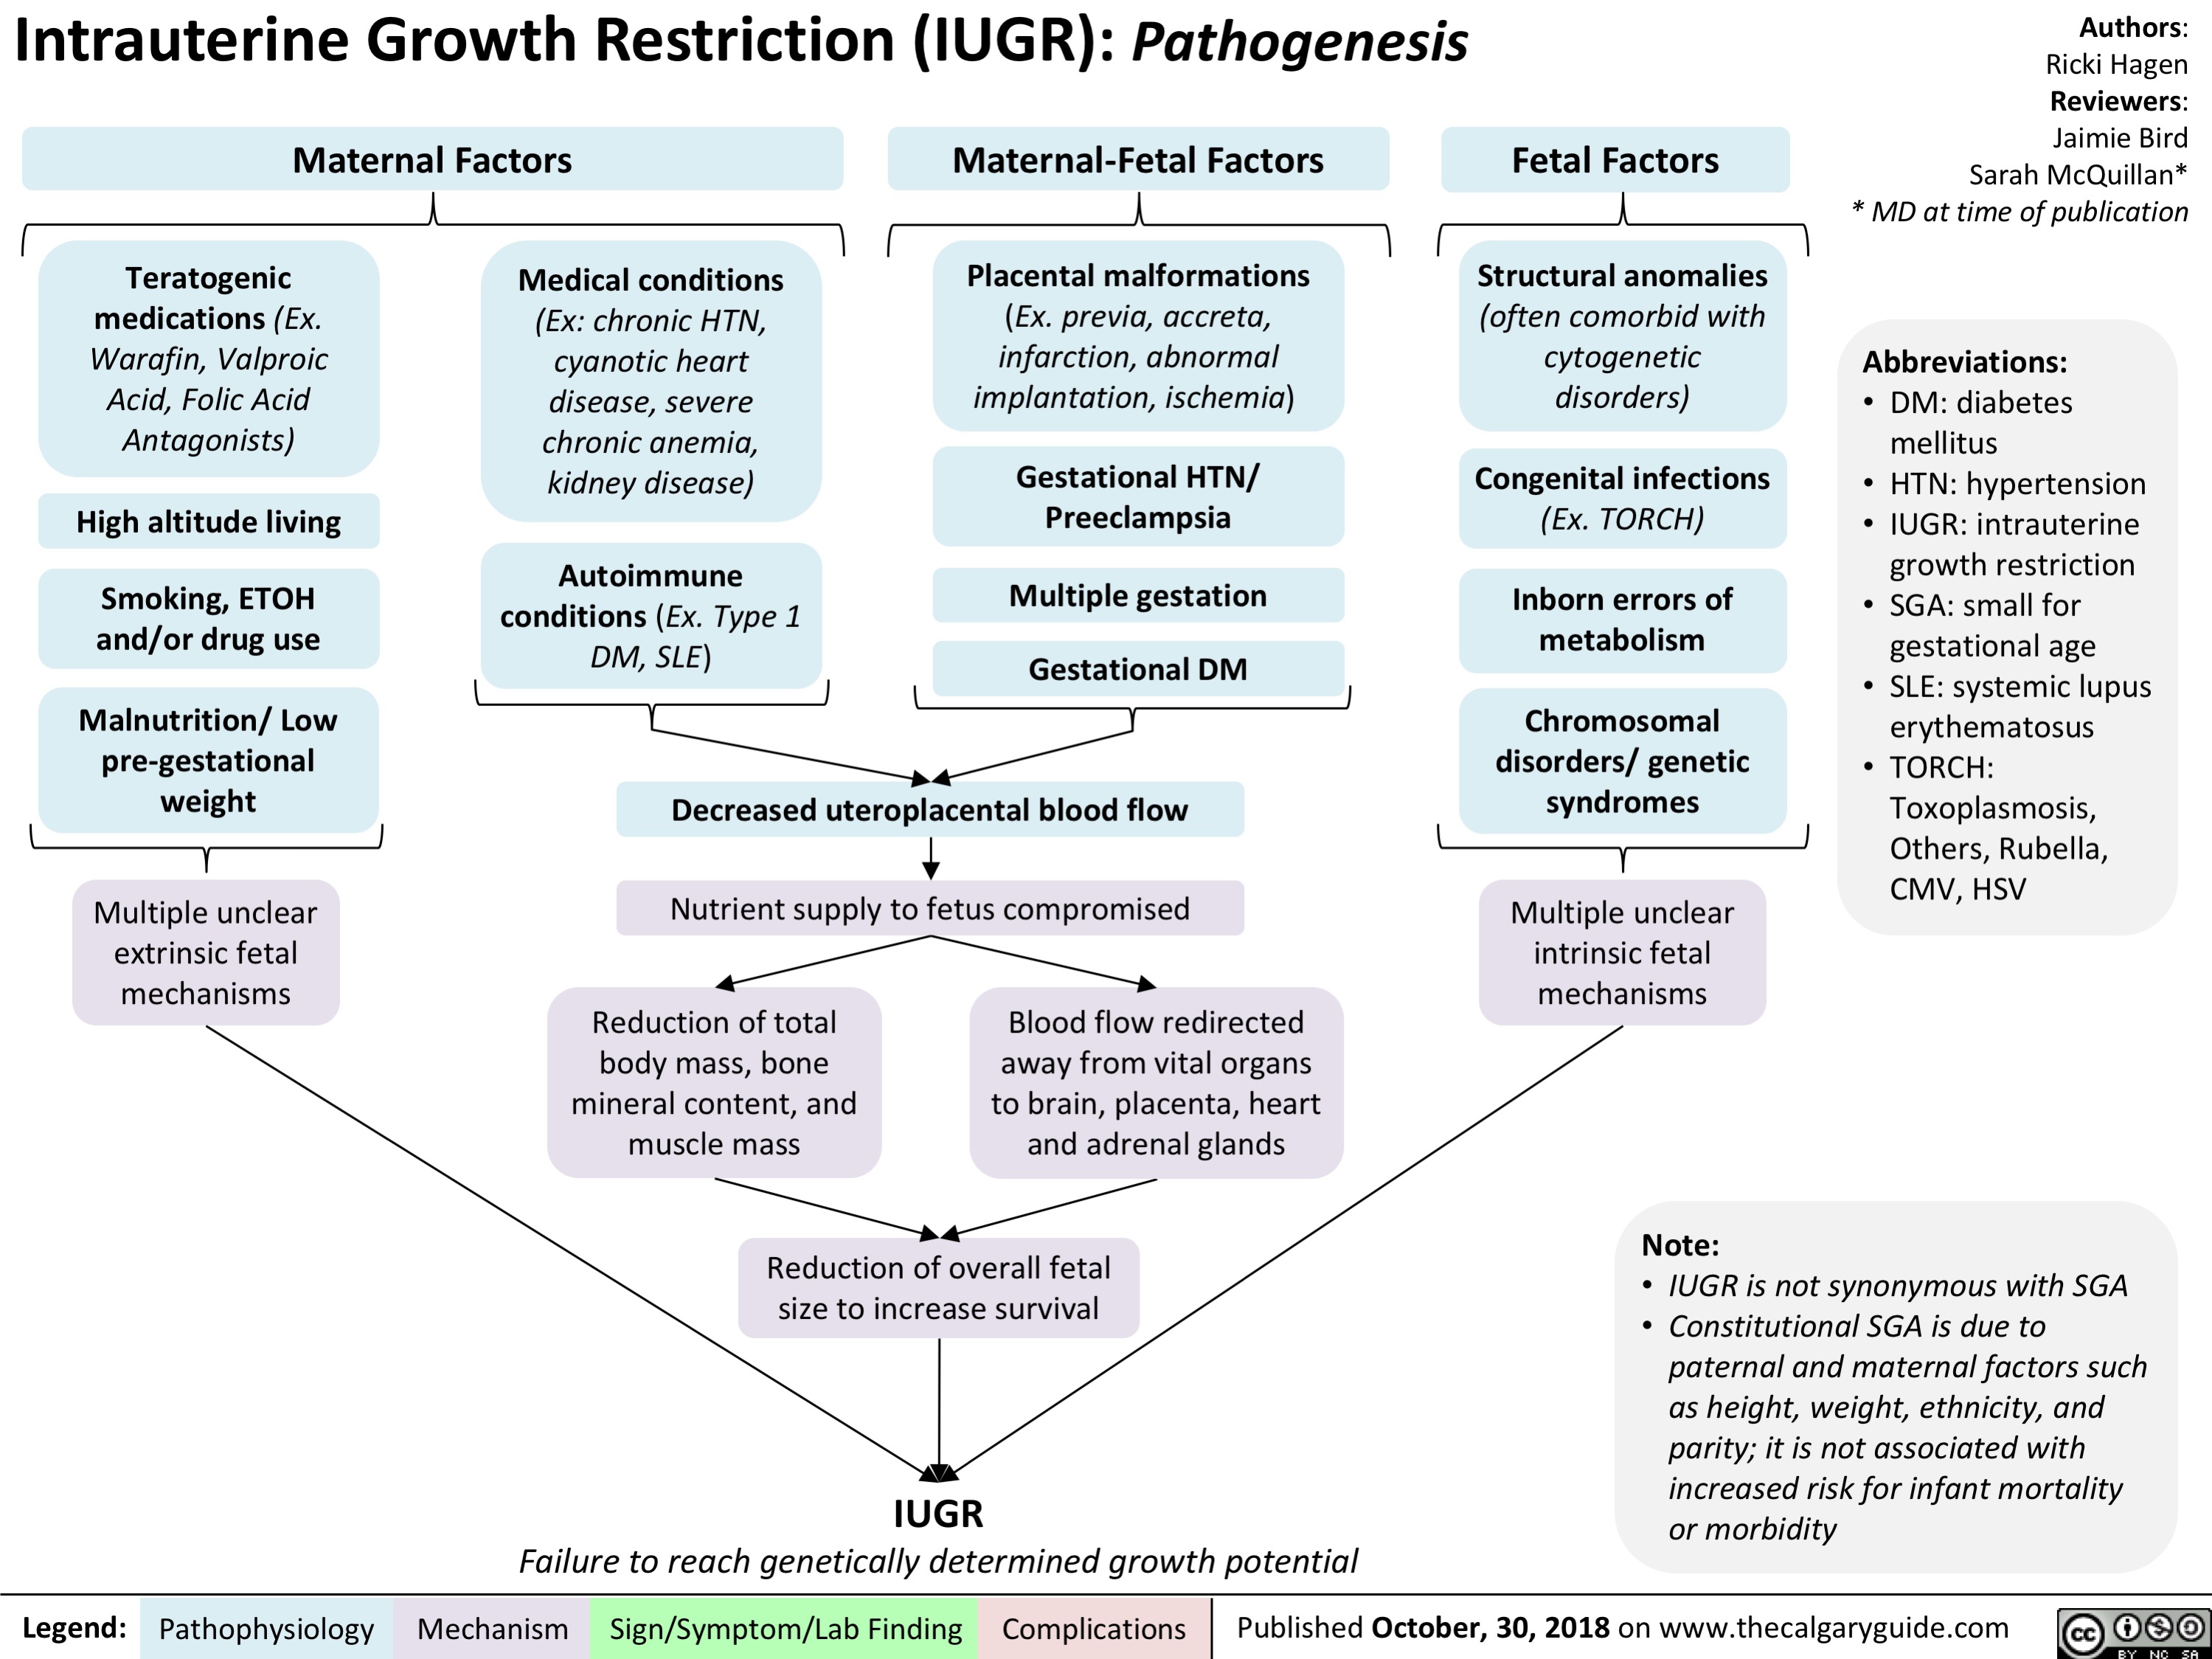 Intrauterine Growth Restriction (IUGR): Pathogenesis
Authors: Ricki Hagen Reviewers: Jaimie Bird Sarah McQuillan* * MD at time of publication
Abbreviations:
• DM: diabetes mellitus
• HTN: hypertension • IUGR: intrauterine growth restriction
• SGA: small for gestational age
• SLE: systemic lupus erythematosus
• TORCH: Toxoplasmosis, Others, Rubella, CMV, HSV
   Maternal Factors
Maternal-Fetal Factors Placental malformations
(Ex. previa, accreta, infarction, abnormal implantation, ischemia)
Gestational HTN/ Preeclampsia
Multiple gestation Gestational DM
Fetal Factors Structural anomalies
(often comorbid with cytogenetic disorders)
Congenital infections
(Ex. TORCH)
Inborn errors of metabolism
Chromosomal disorders/ genetic syndromes
Multiple unclear intrinsic fetal mechanisms
Note:
       Teratogenic medications (Ex. Warafin, Valproic Acid, Folic Acid Antagonists)
High altitude living
Smoking, ETOH and/or drug use
Malnutrition/ Low pre-gestational weight
Multiple unclear extrinsic fetal mechanisms
Medical conditions
(Ex: chronic HTN, cyanotic heart disease, severe chronic anemia, kidney disease)
Autoimmune conditions (Ex. Type 1 DM, SLE)
                Decreased uteroplacental blood flow
Nutrient supply to fetus compromised
          Reduction of total body mass, bone
mineral content, and muscle mass
Blood flow redirected away from vital organs to brain, placenta, heart and adrenal glands
      Reduction of overall fetal size to increase survival
IUGR
Failure to reach genetically determined growth potential
• IUGR is not synonymous with SGA • Constitutional SGA is due to
paternal and maternal factors such as height, weight, ethnicity, and parity; it is not associated with increased risk for infant mortality or morbidity
  Legend:
 Pathophysiology
 Mechanism
Sign/Symptom/Lab Finding
  Complications
Published October, 30, 2018 on www.thecalgaryguide.com
   